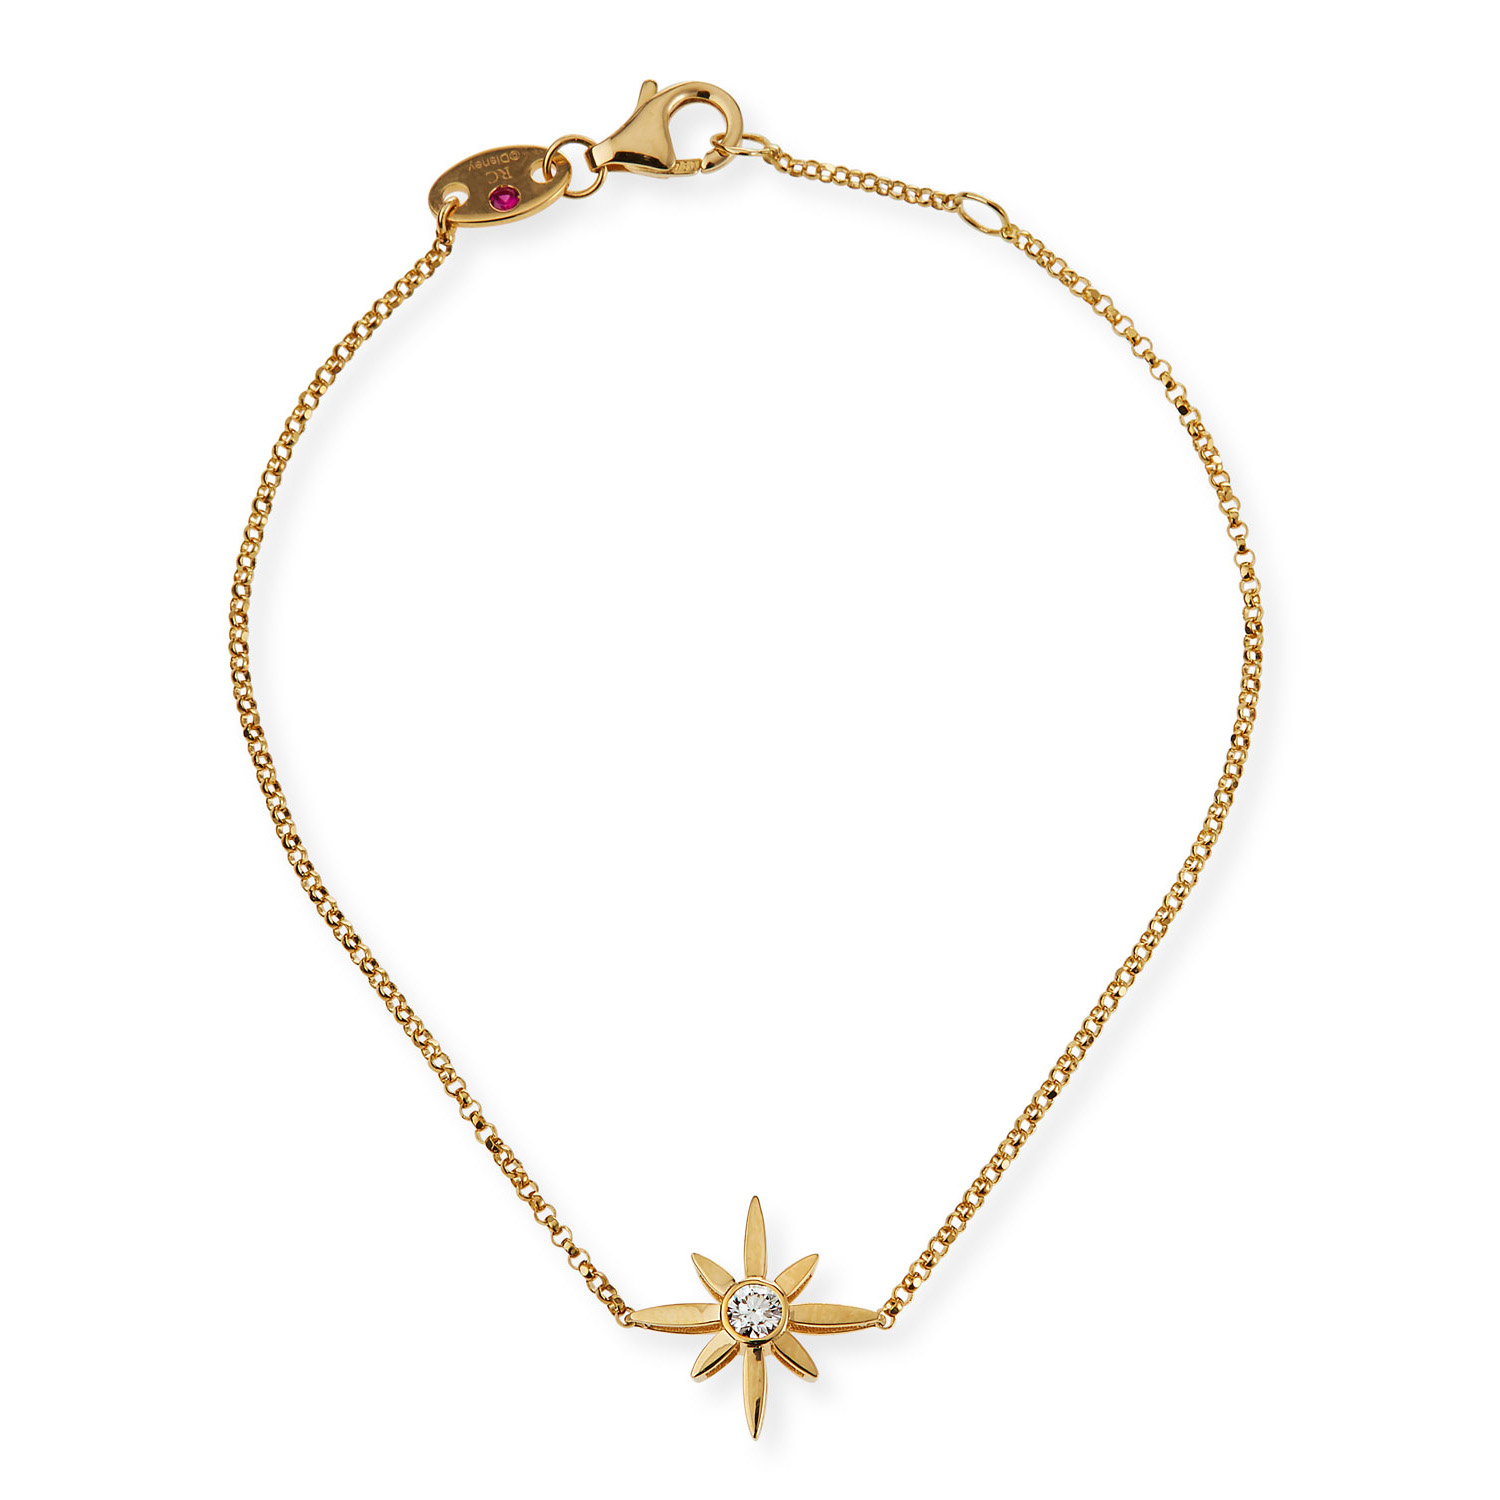 Wholesale OEM/ODM Jewelry Custom Star silver Bracelet in 18k Gold vermeil  design and create your own jewelry